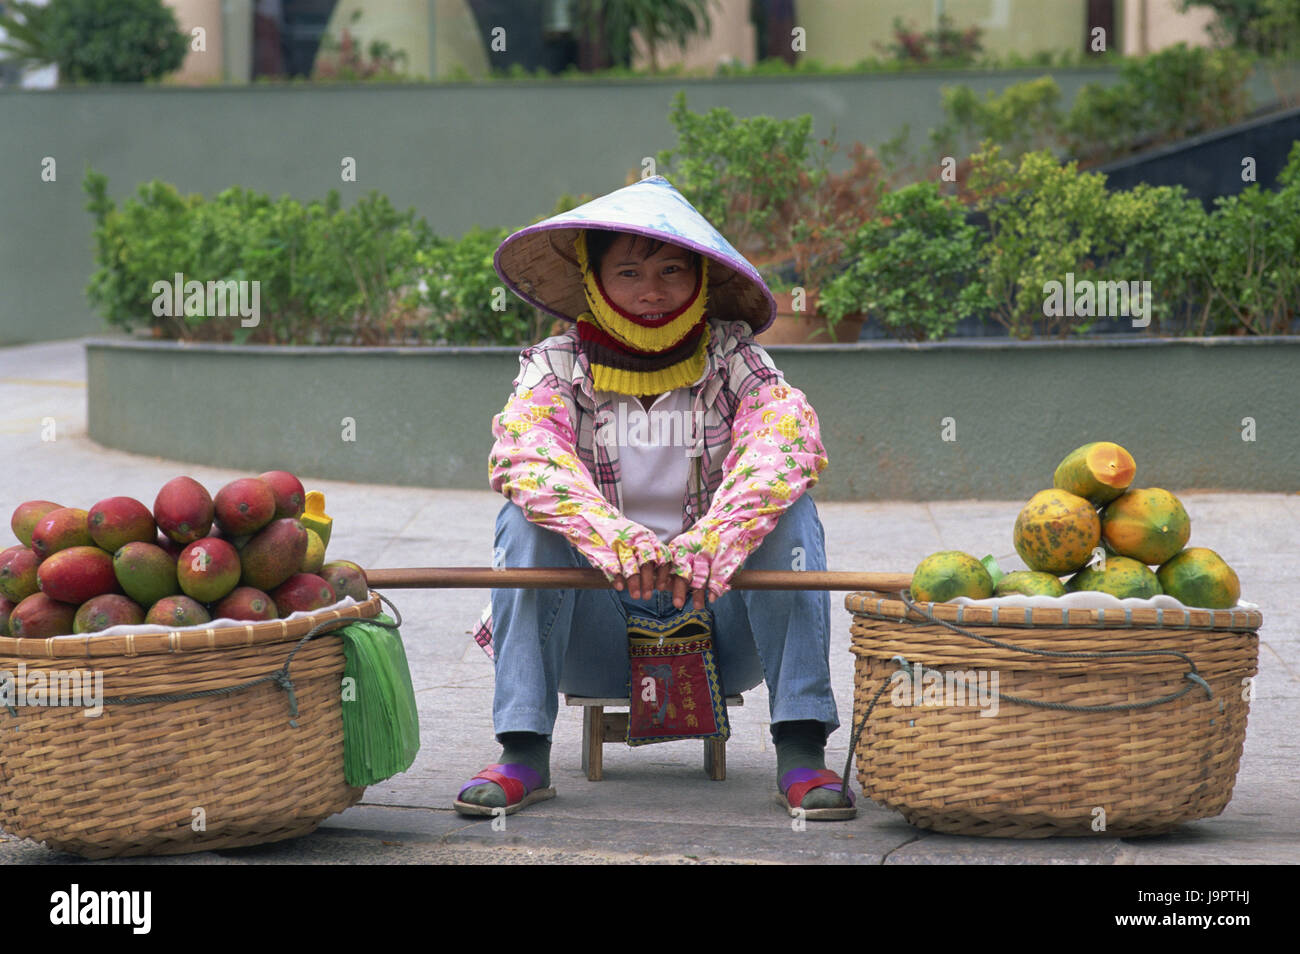 China,Hainan Iceland,Sanya,Dadonghai Beach,fruit merchant,sit,no model release,Asia,Eastern Asia,destination,person,tourism,sales,shop assistant,care,headgear,whole body,product,baskets,costs baskets,mangos,papayas,fruits,fruit,street sales,clothes,typically, Stock Photo